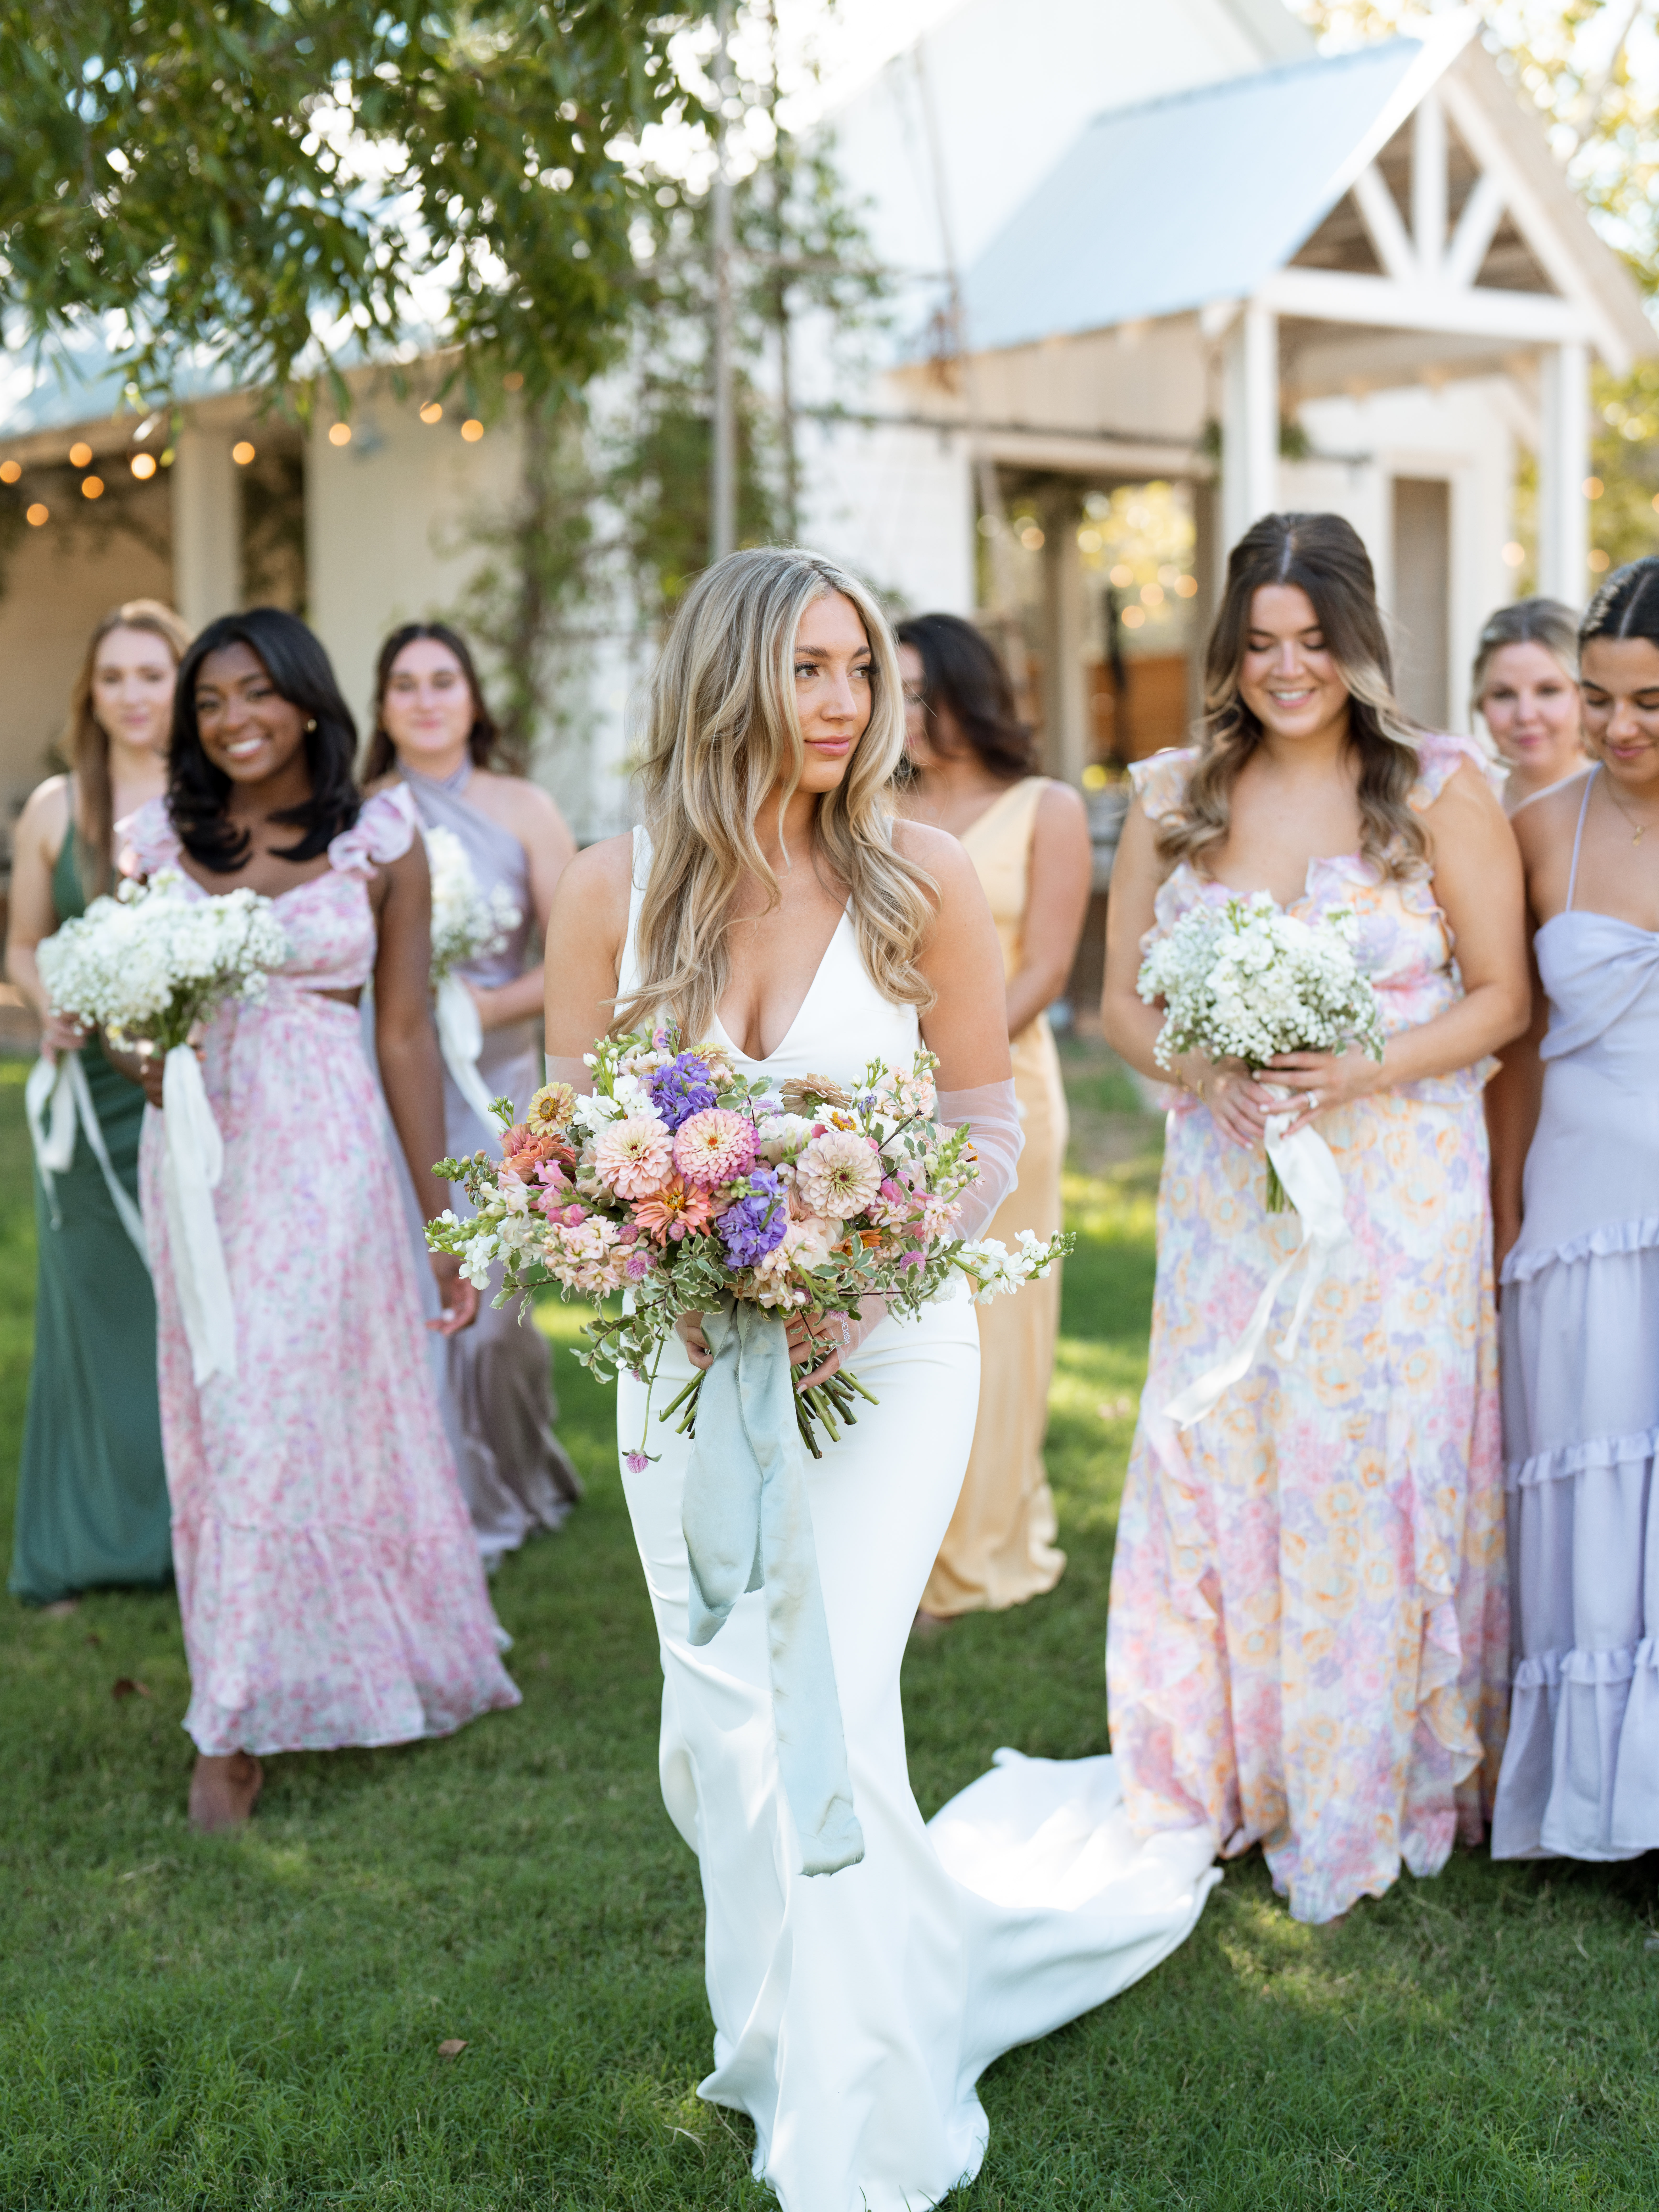 Colorful wedding with mixed matched bridesmaid dresses